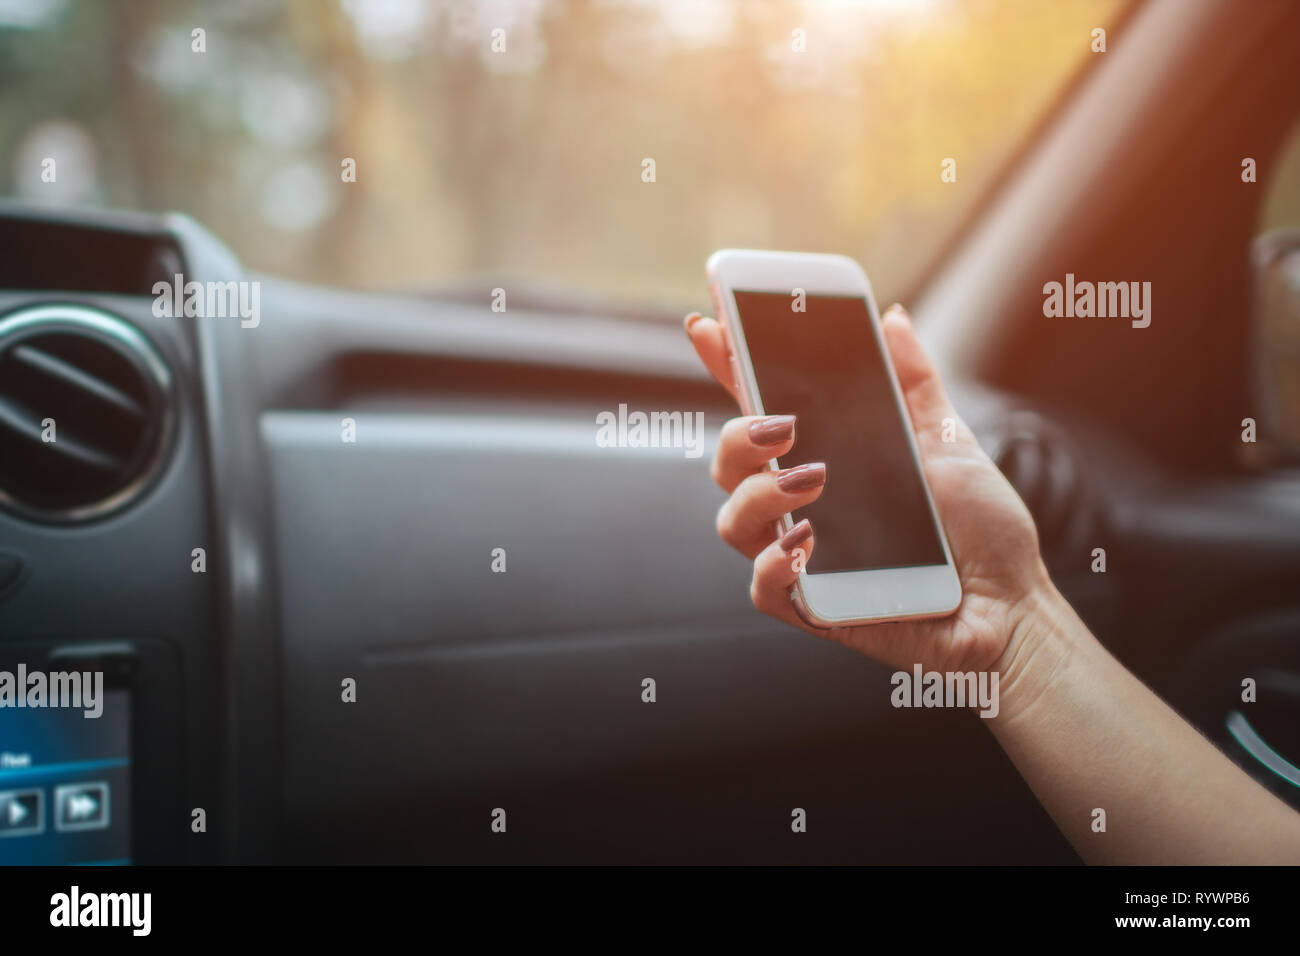 eautiful woman smiling while sitting on the front passenger seats in the car. Girl is using a smartphone. Hand closeup. Stock Photo